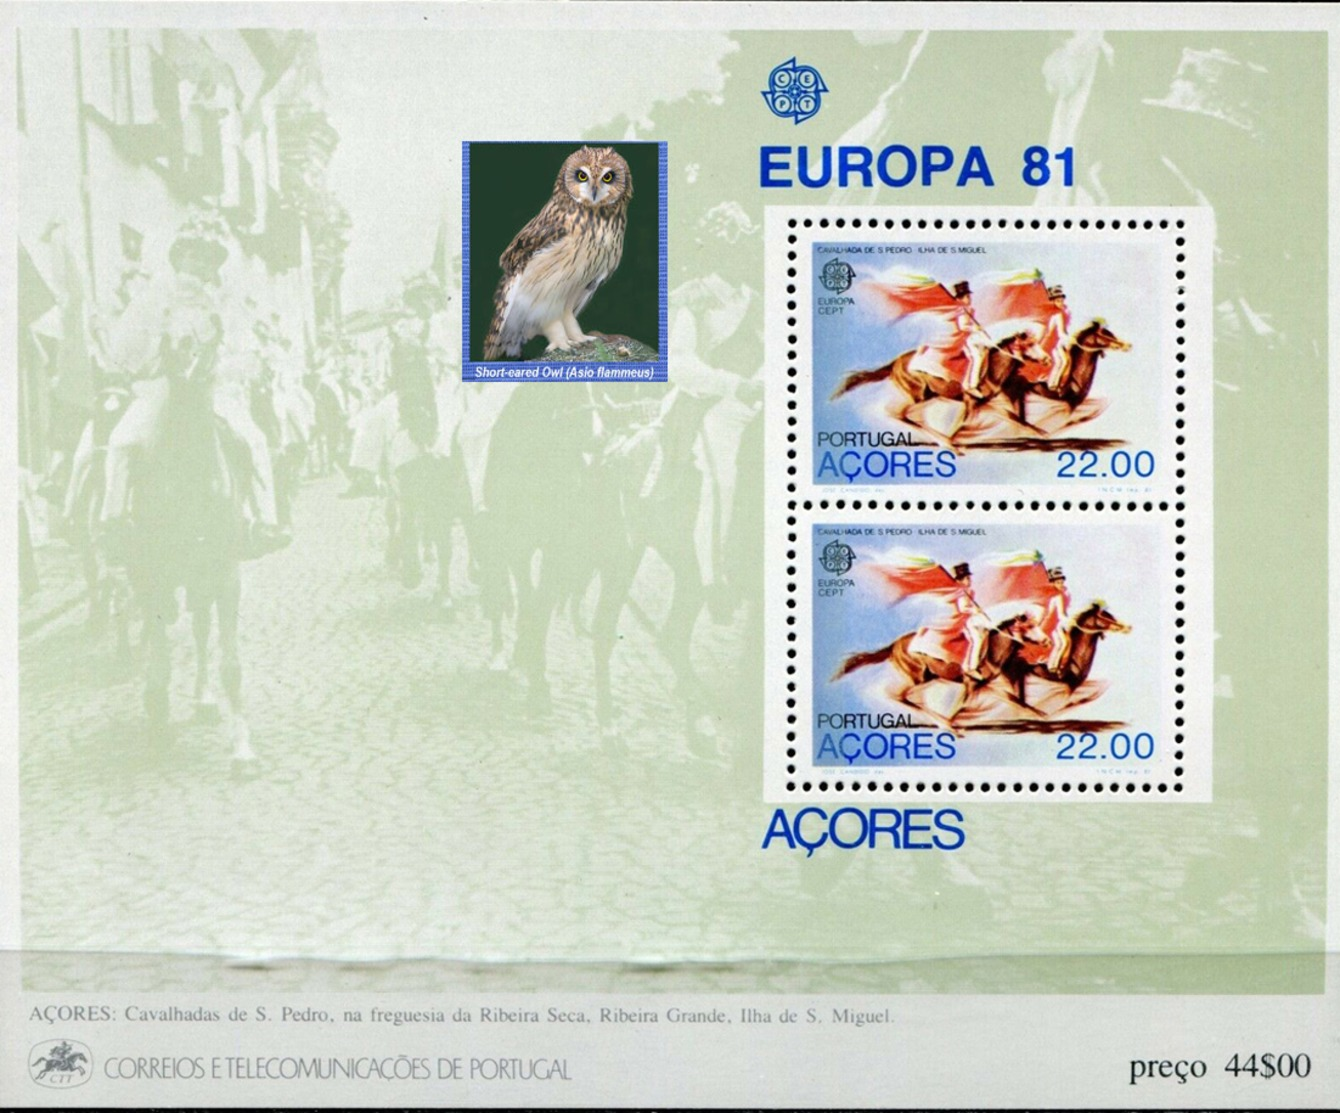 PORTUGAL ACORES  -   OWLS VERY INTERESTING  -1 Sheet MNH - Hiboux & Chouettes